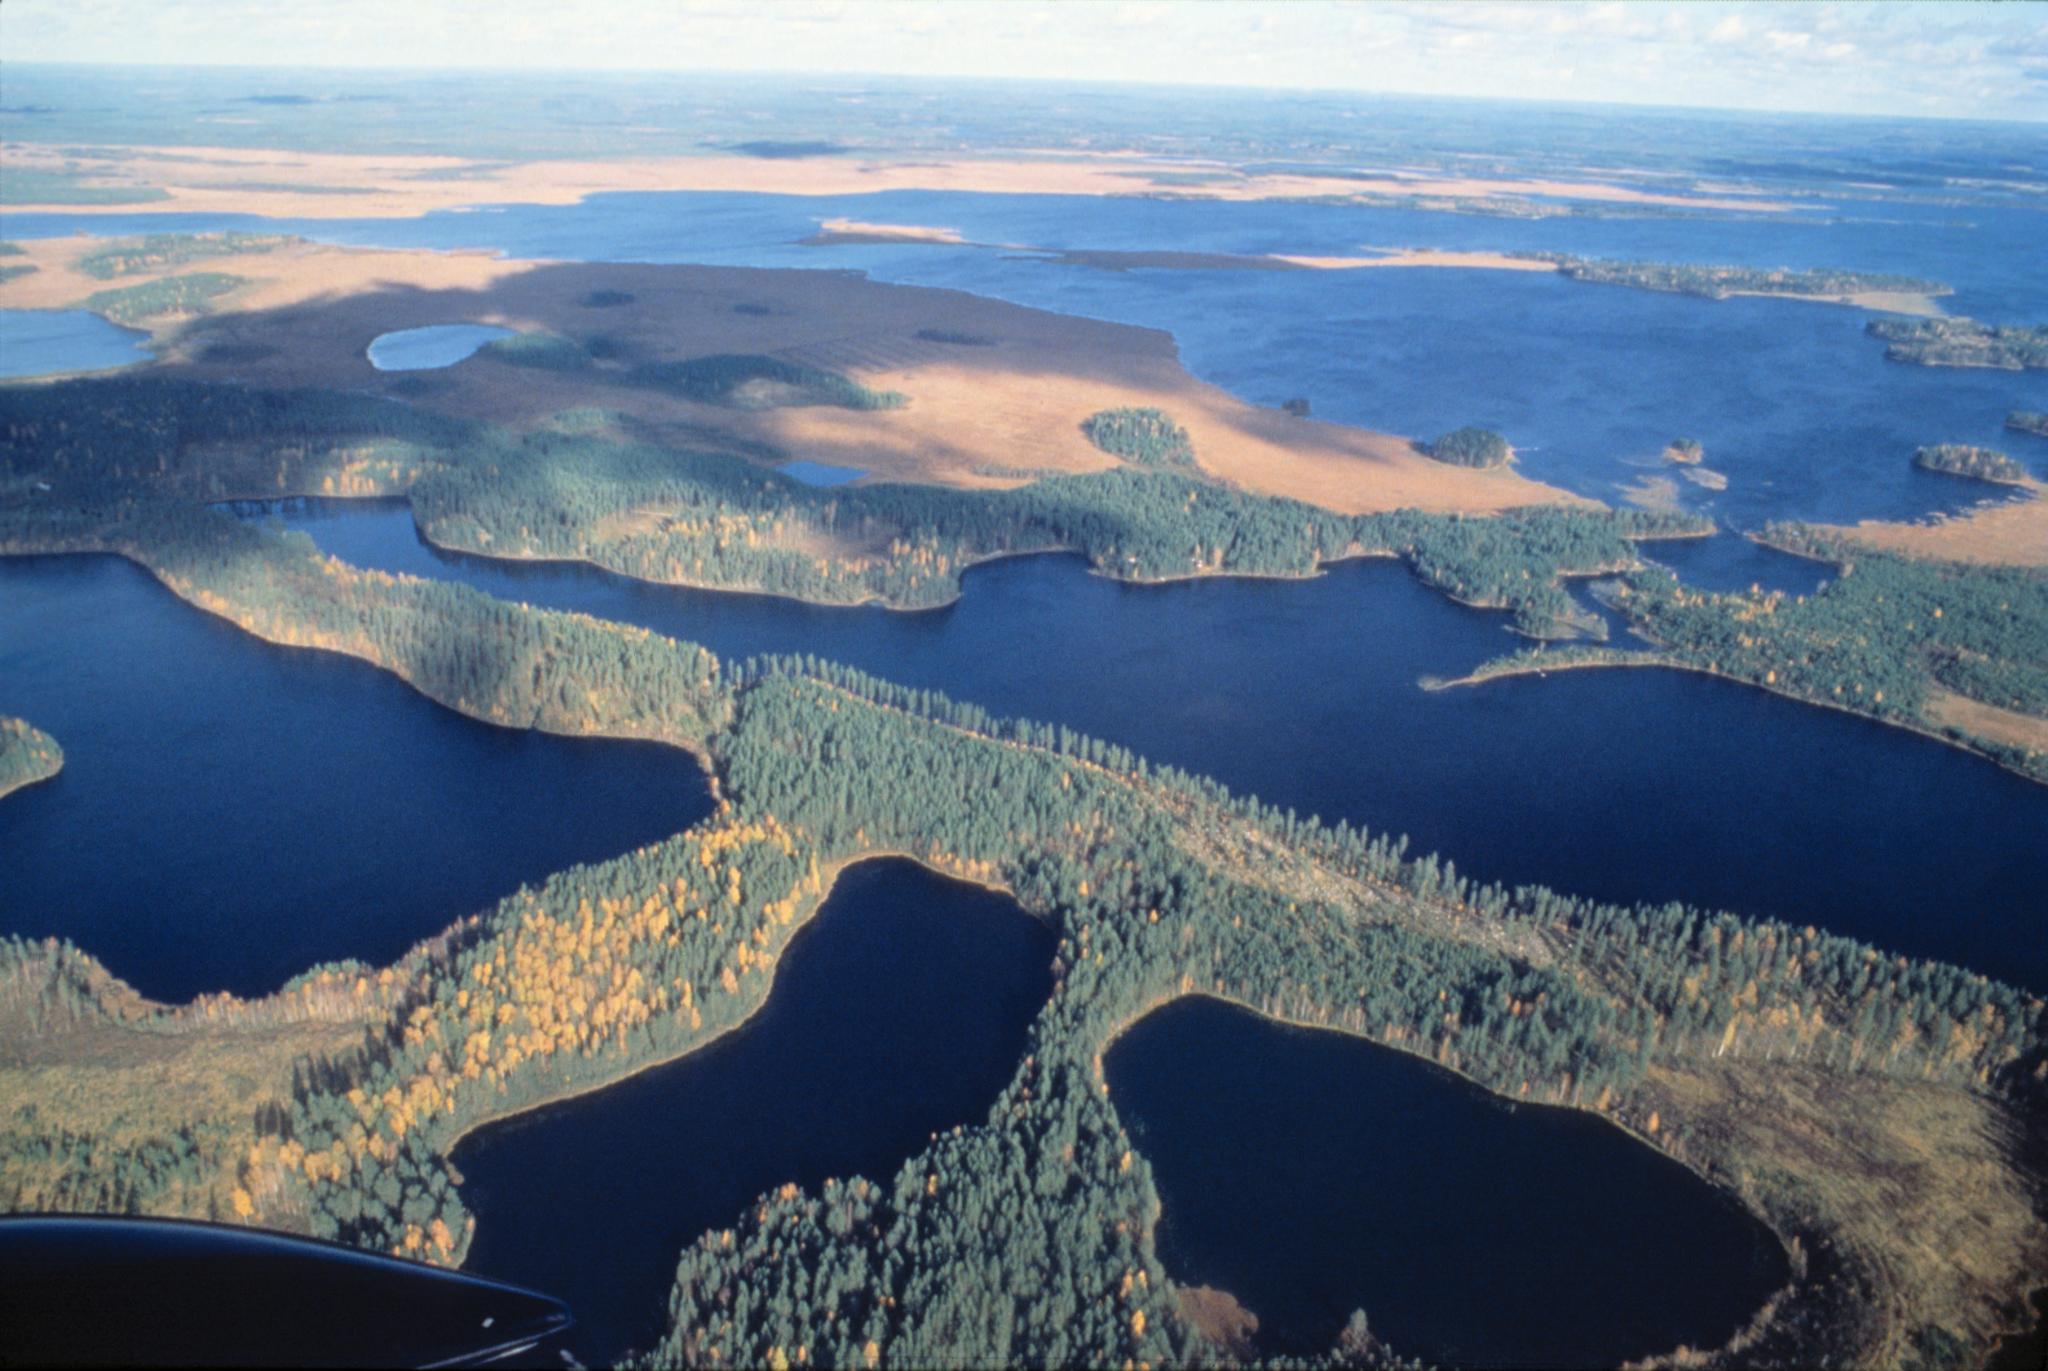 Which Country Is Nicknamed The Land Of 1,000 Lakes?